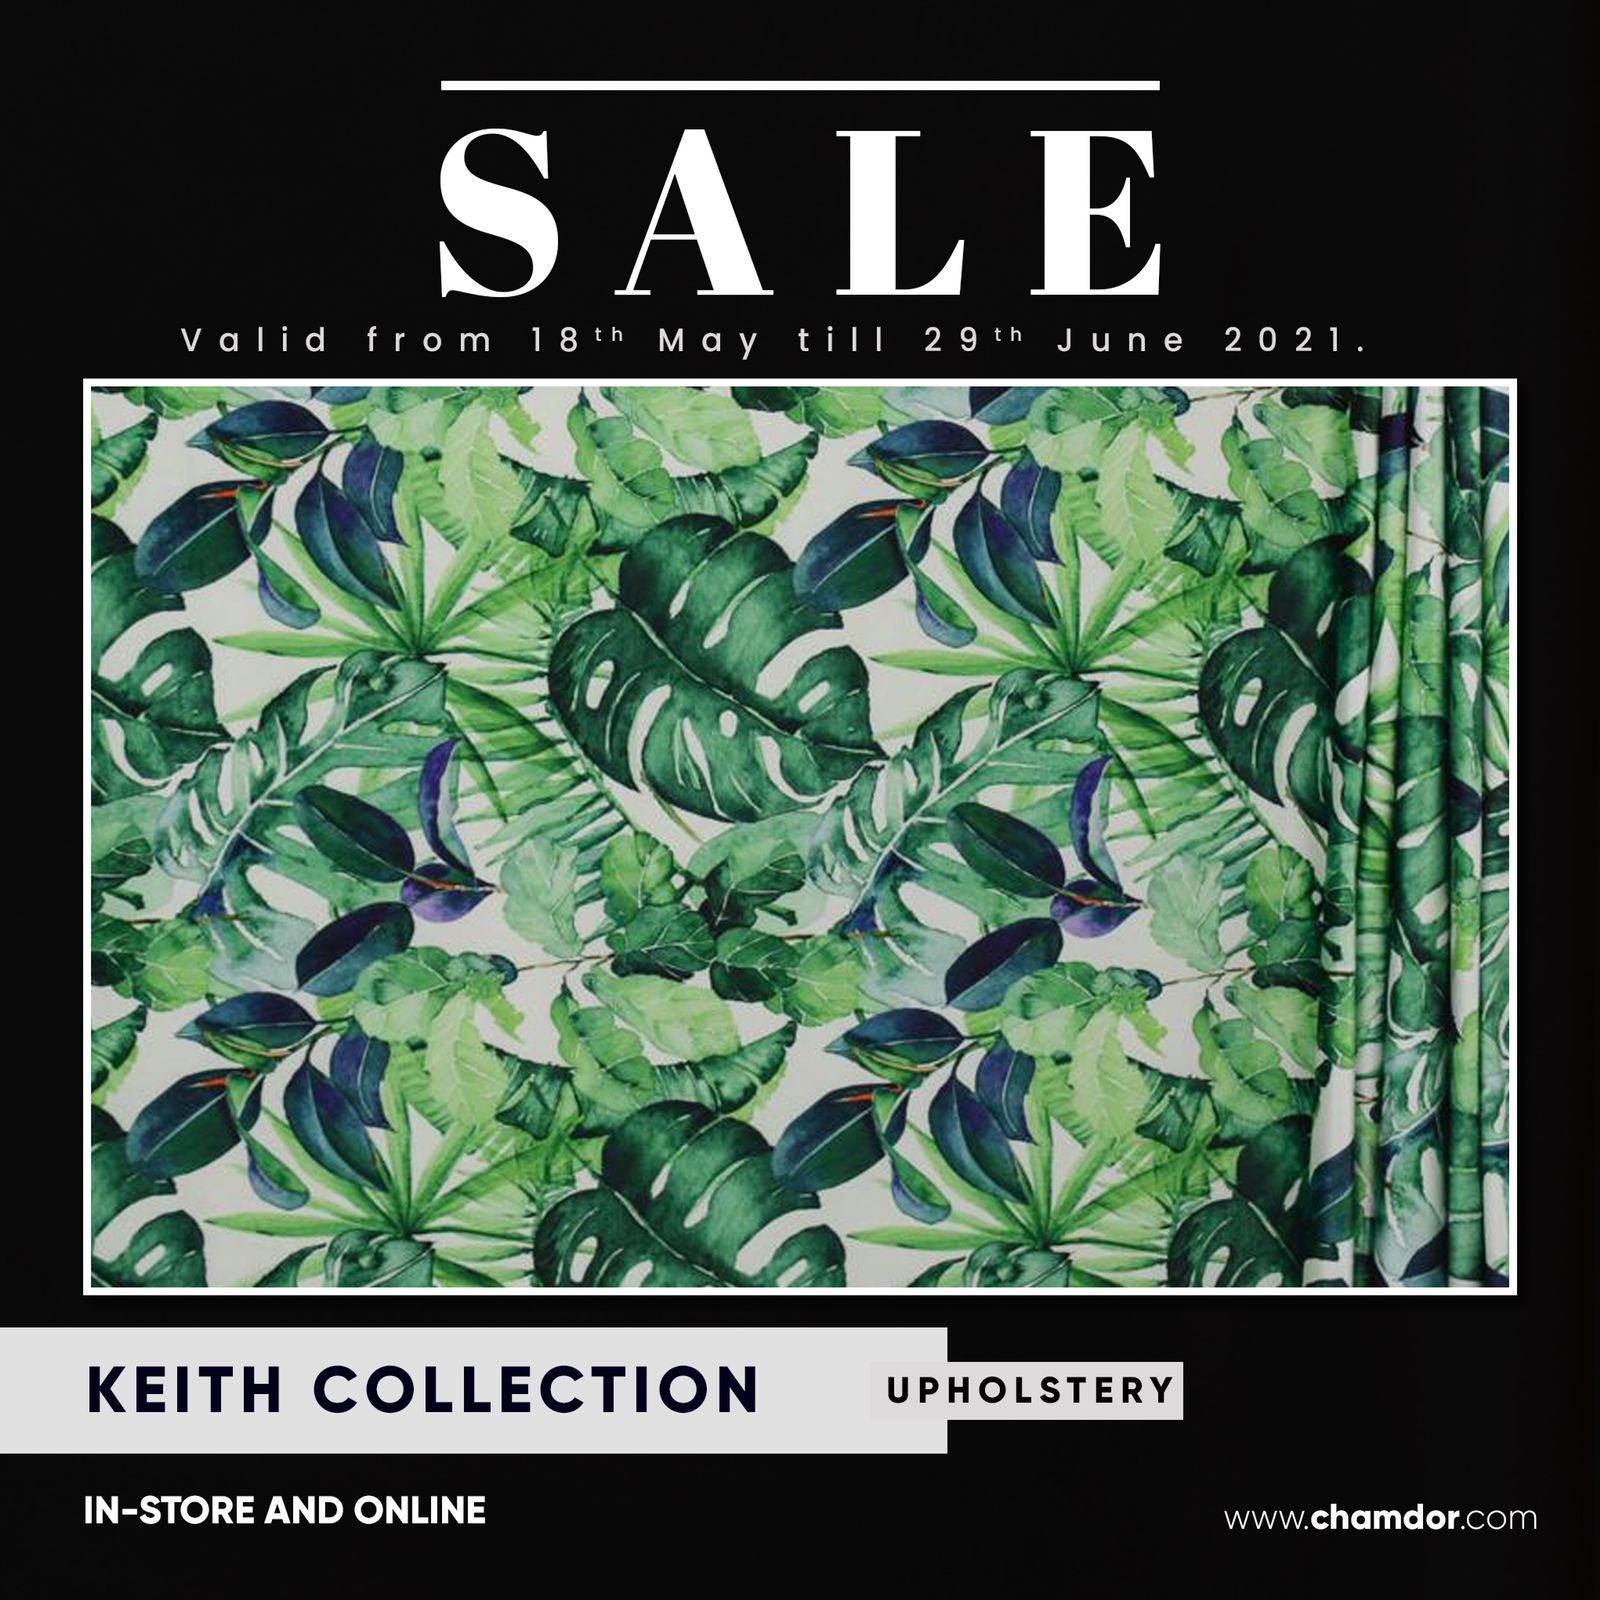 Keith Velvet Collection - SALE